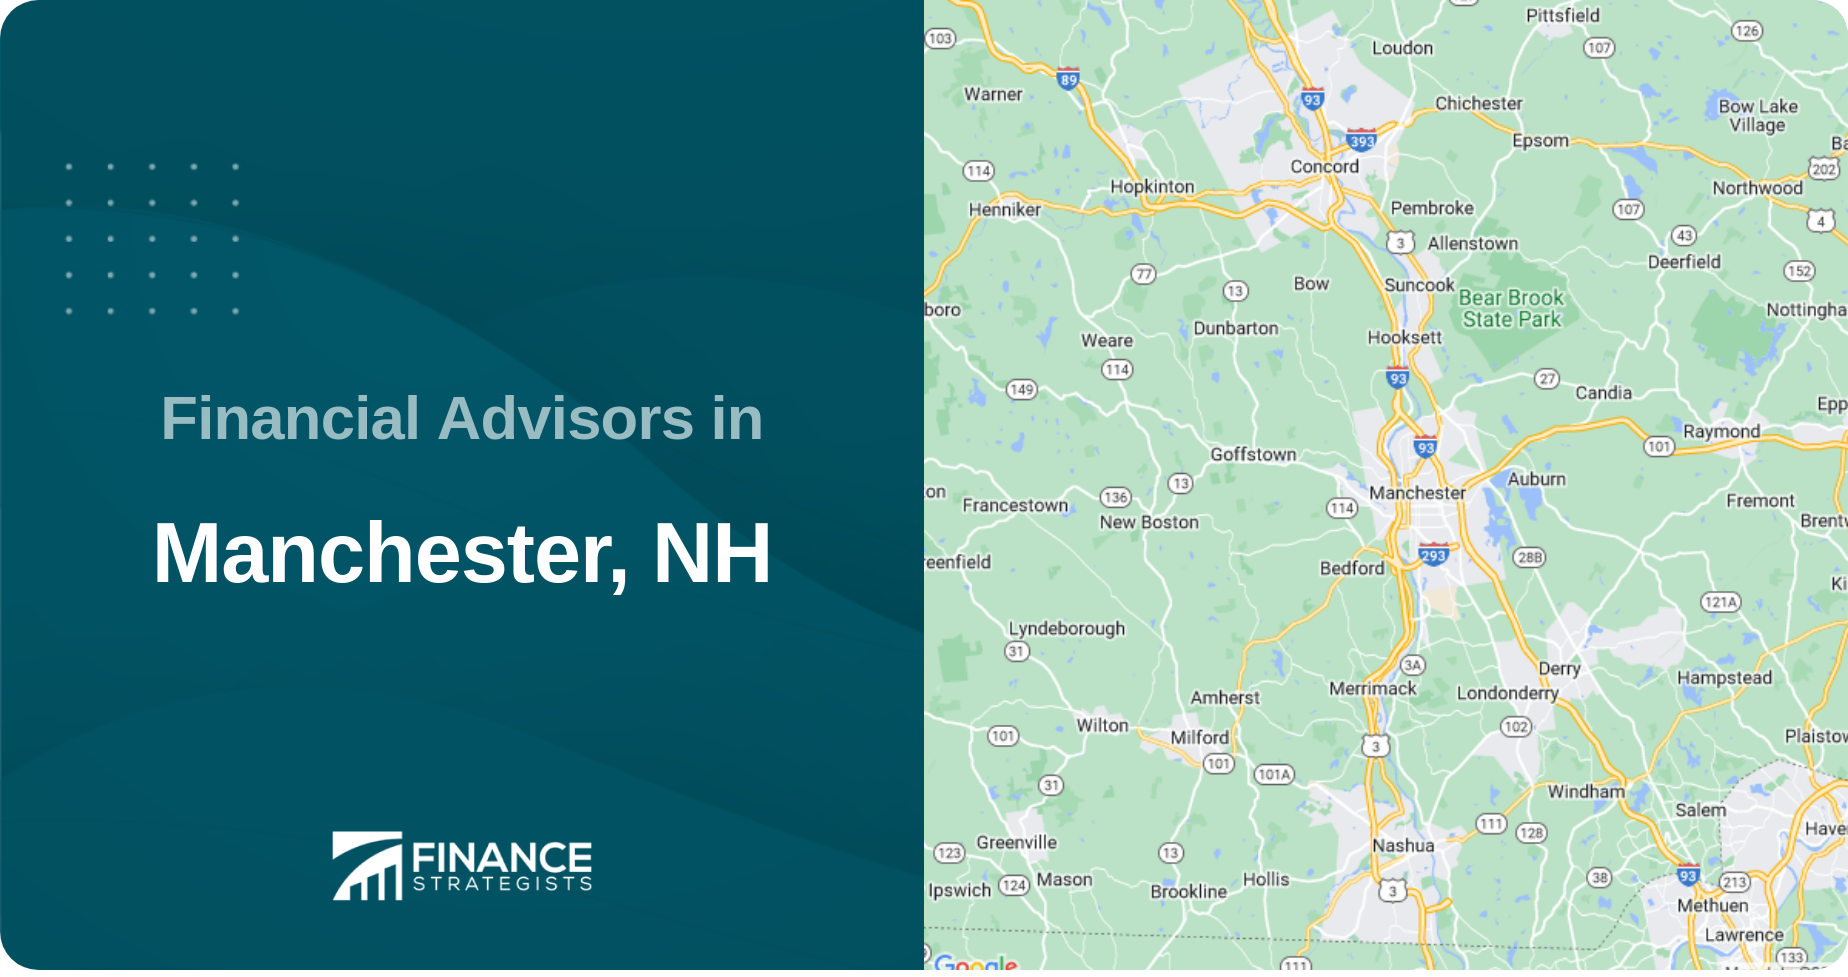 Financial Advisors in Manchester, NH